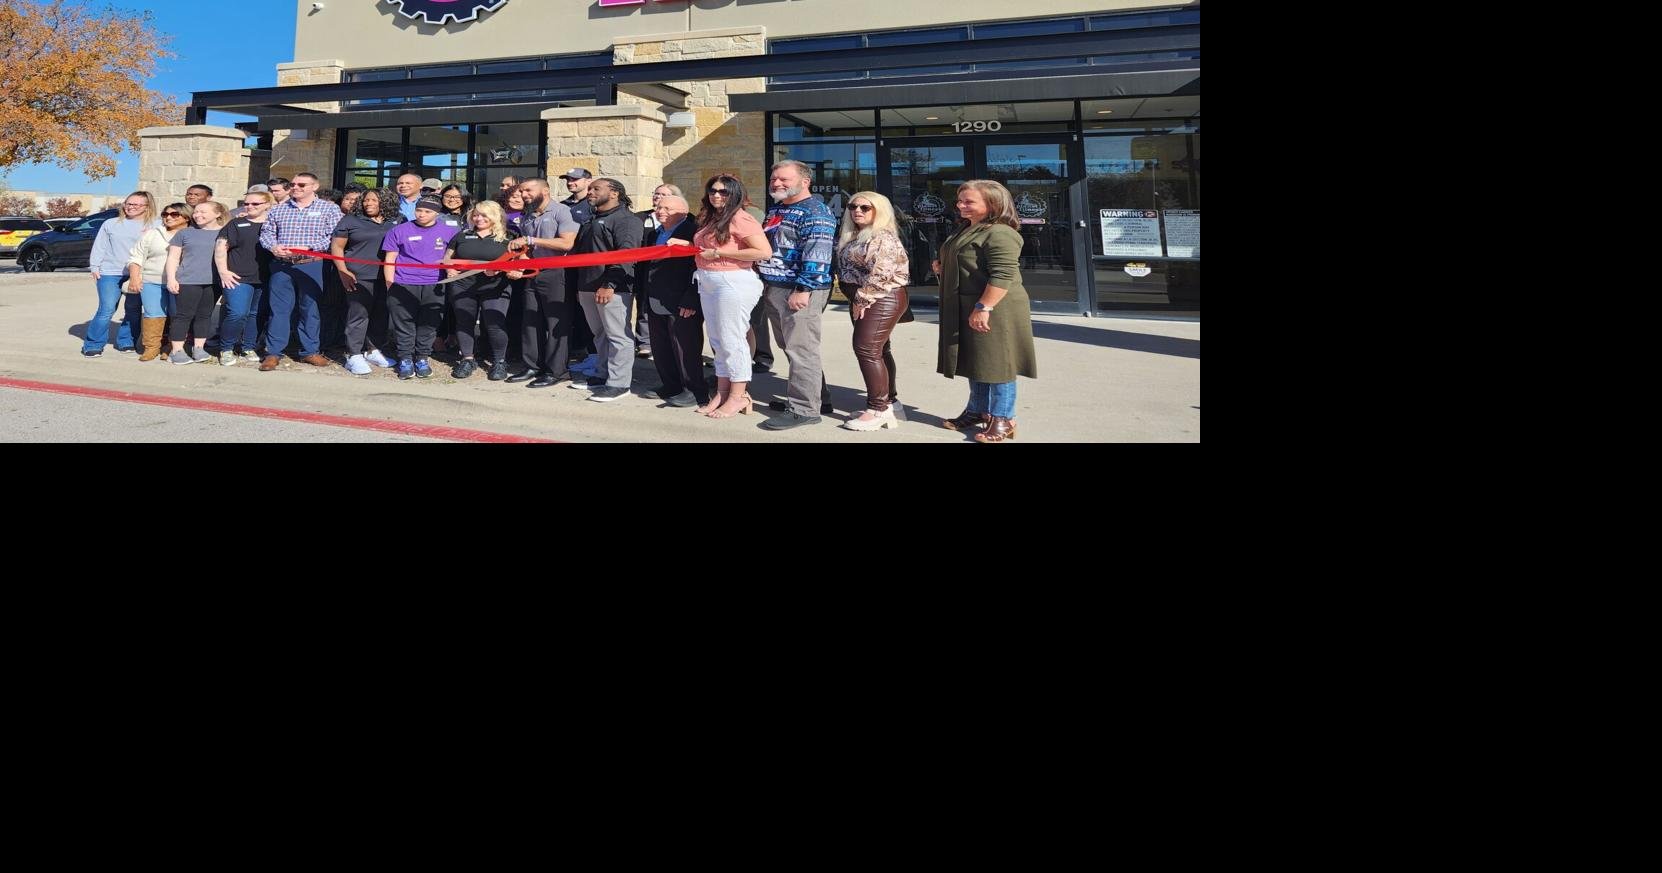 New Planet Fitness gym opens in Bellmead, Texas